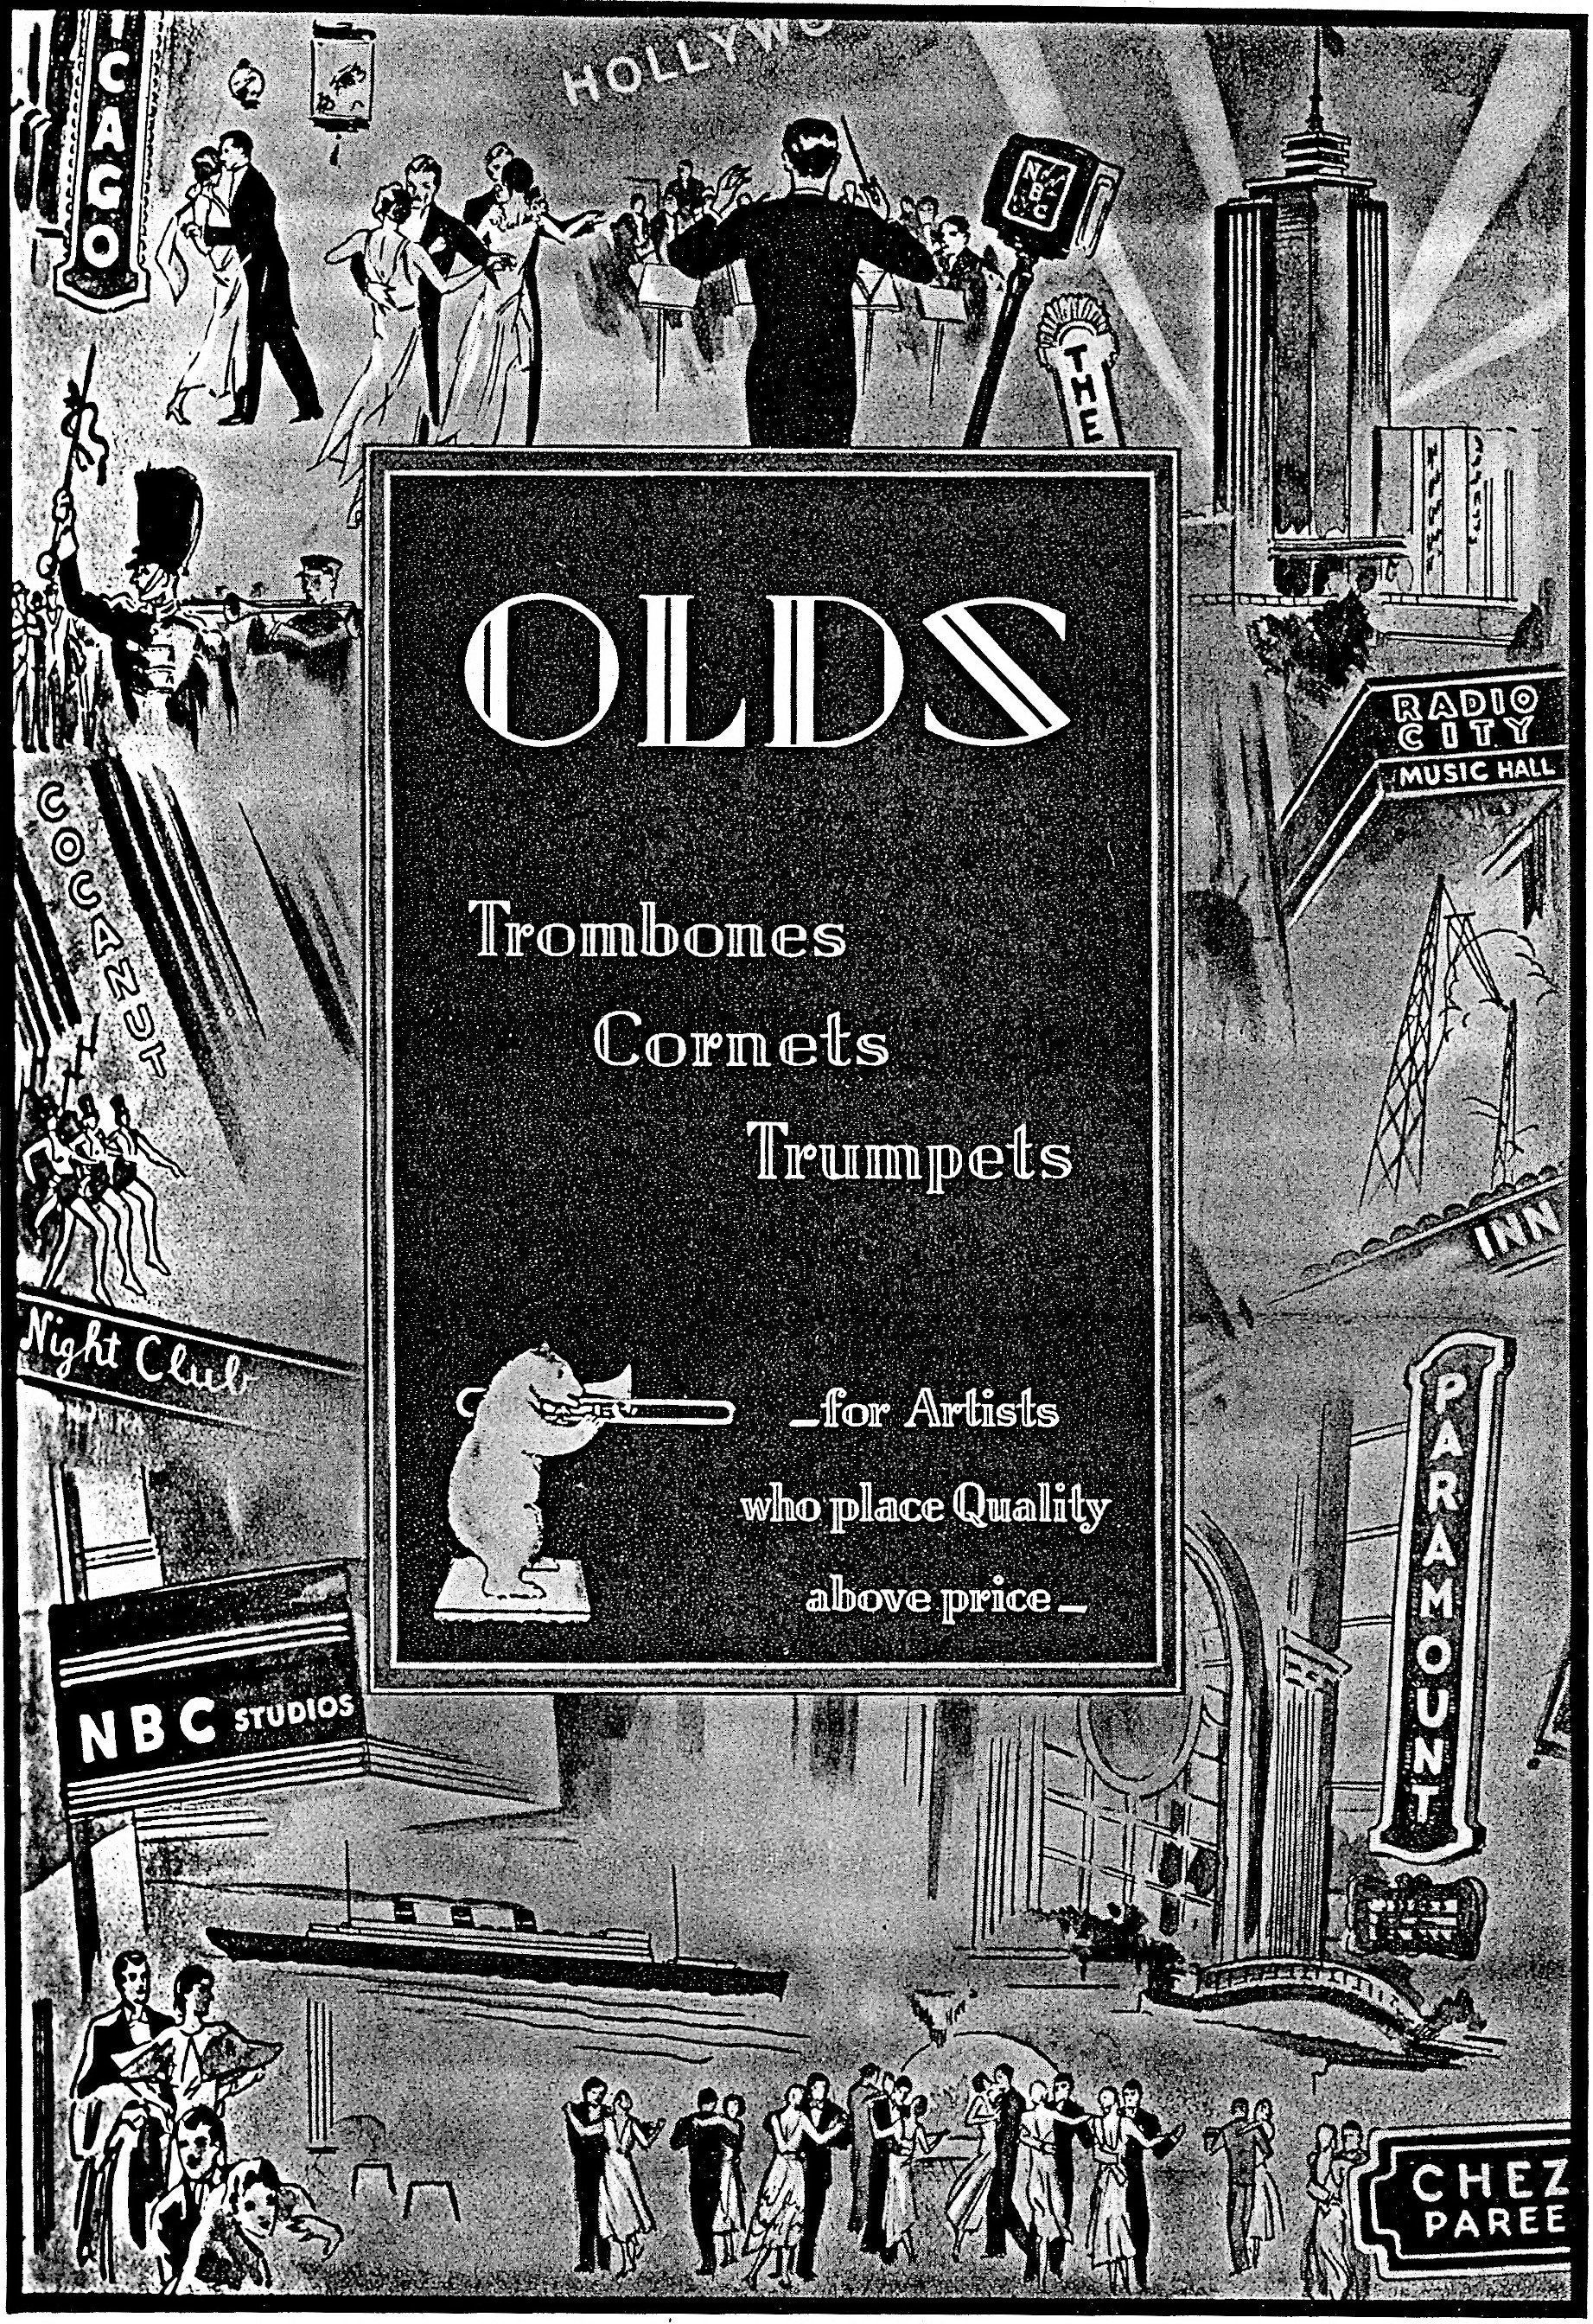 Olds Catalog, about 1933